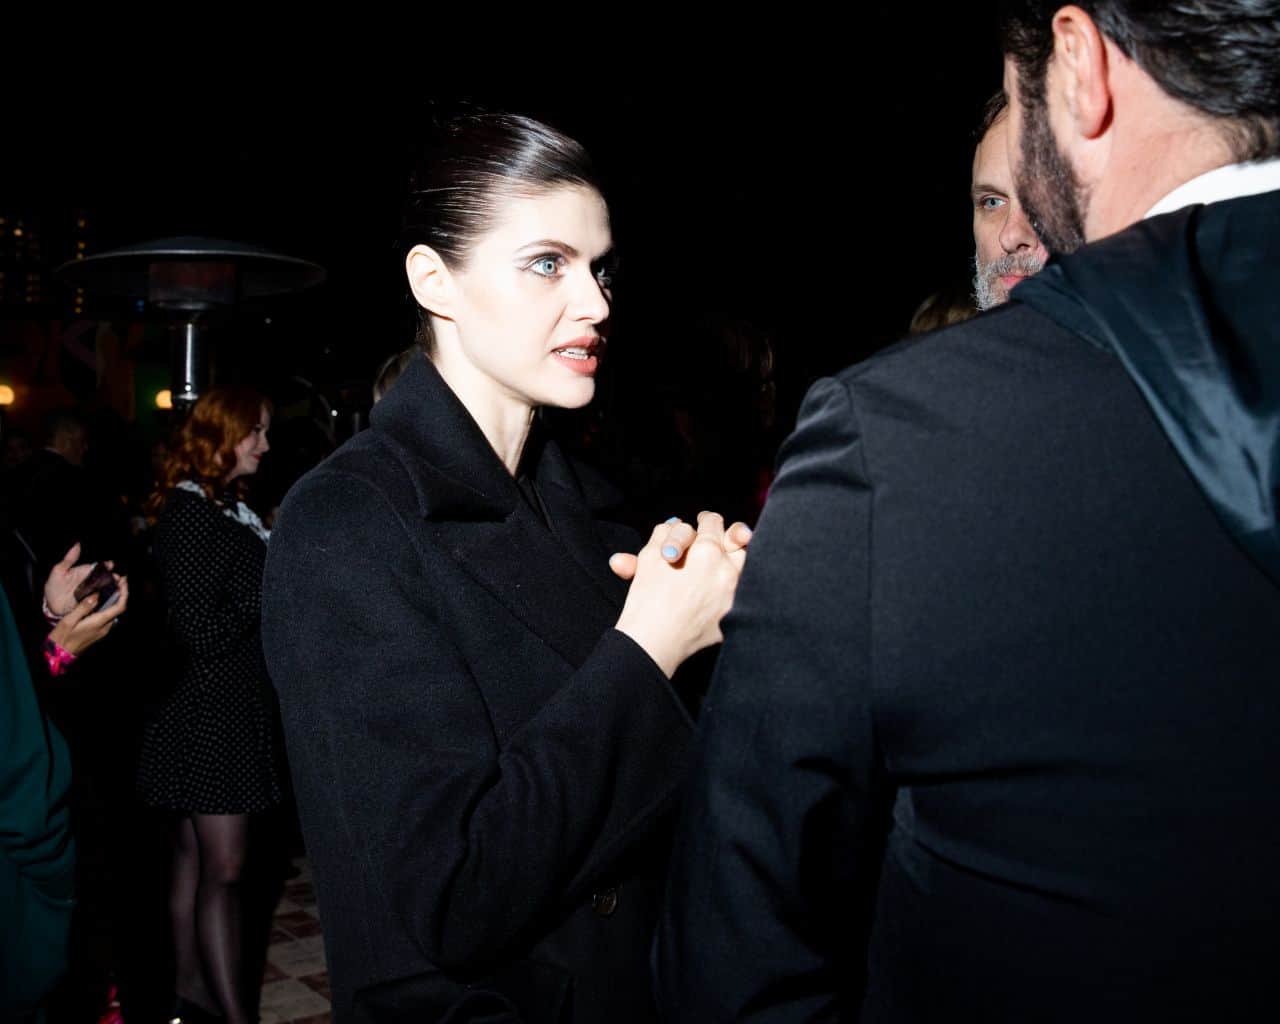 Alexandra Daddario Impresses in Chic and Stylish Ensemble at Roger Vivier Dinner Event